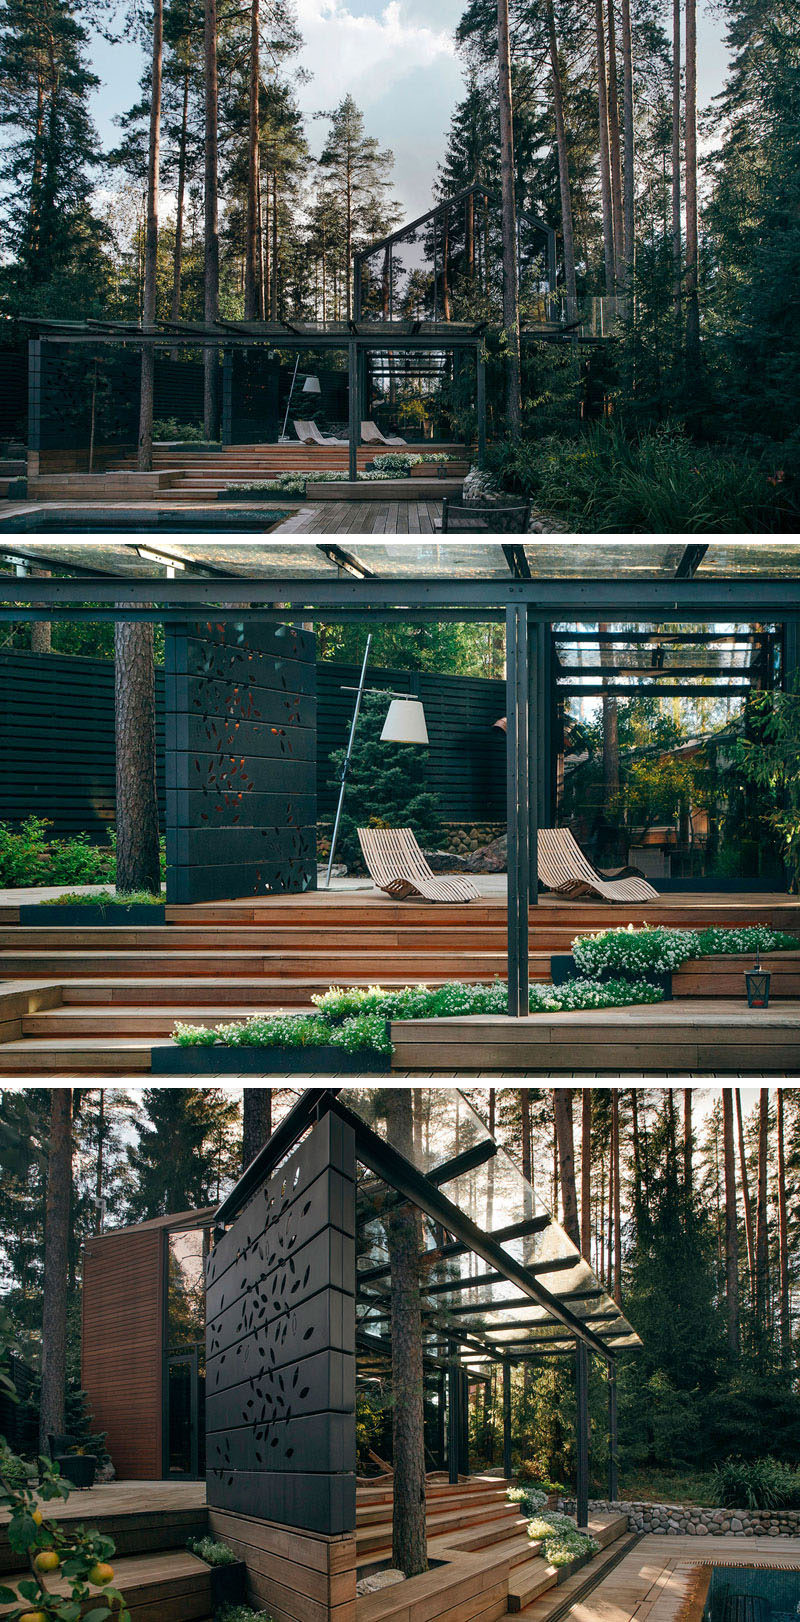 Olga Vetosheva and Eduard Zakharov of HOROMYSTUDIO have designed this modern gym with outdoor sundeck that's located within the forest near Saint-Petersburg, Russia.